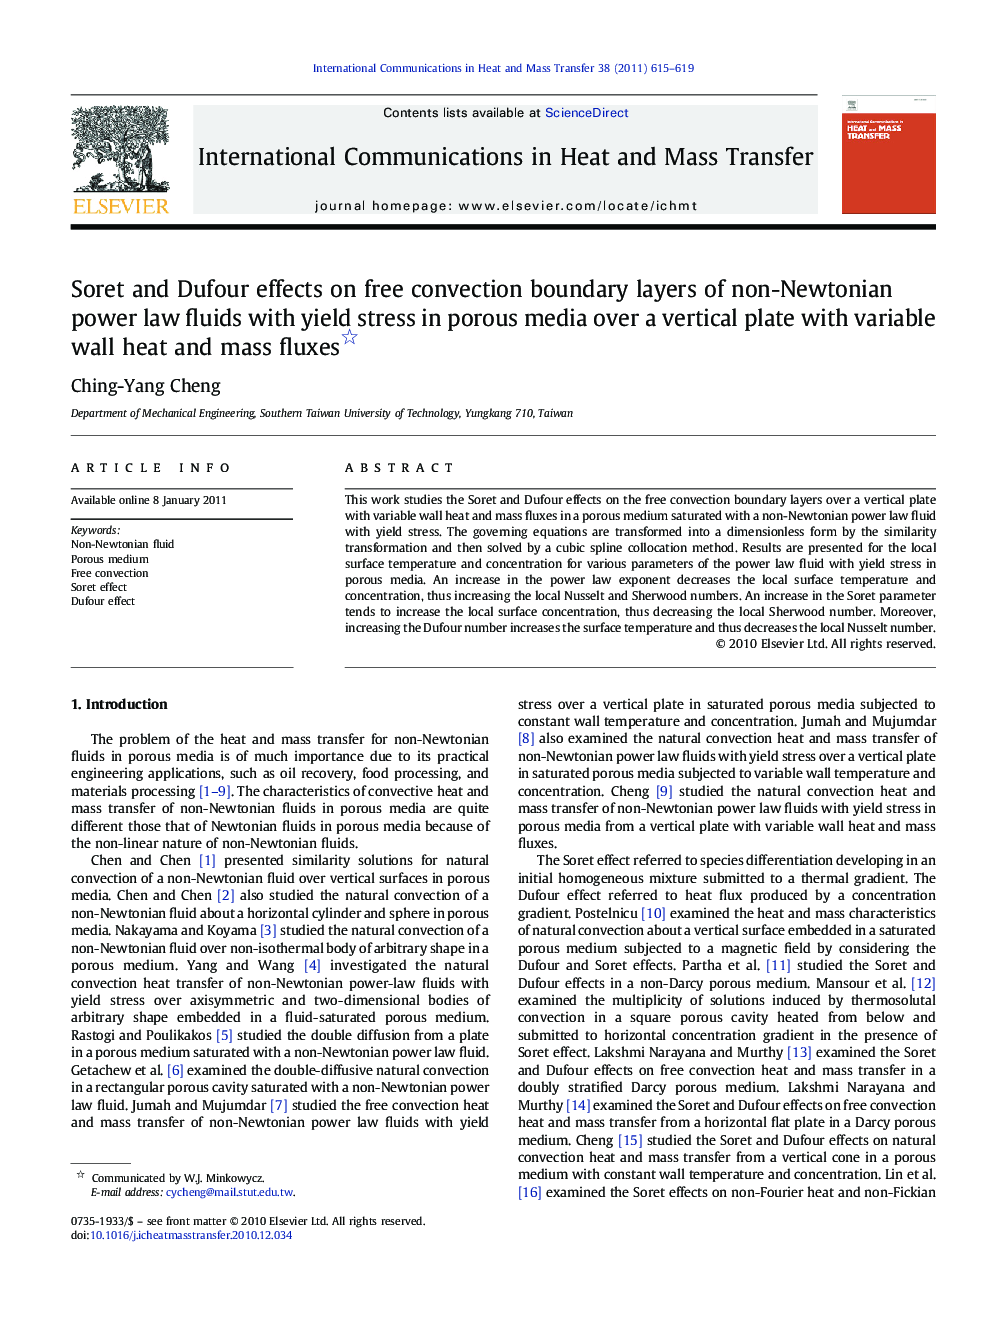 Soret and Dufour effects on free convection boundary layers of non-Newtonian power law fluids with yield stress in porous media over a vertical plate with variable wall heat and mass fluxes 